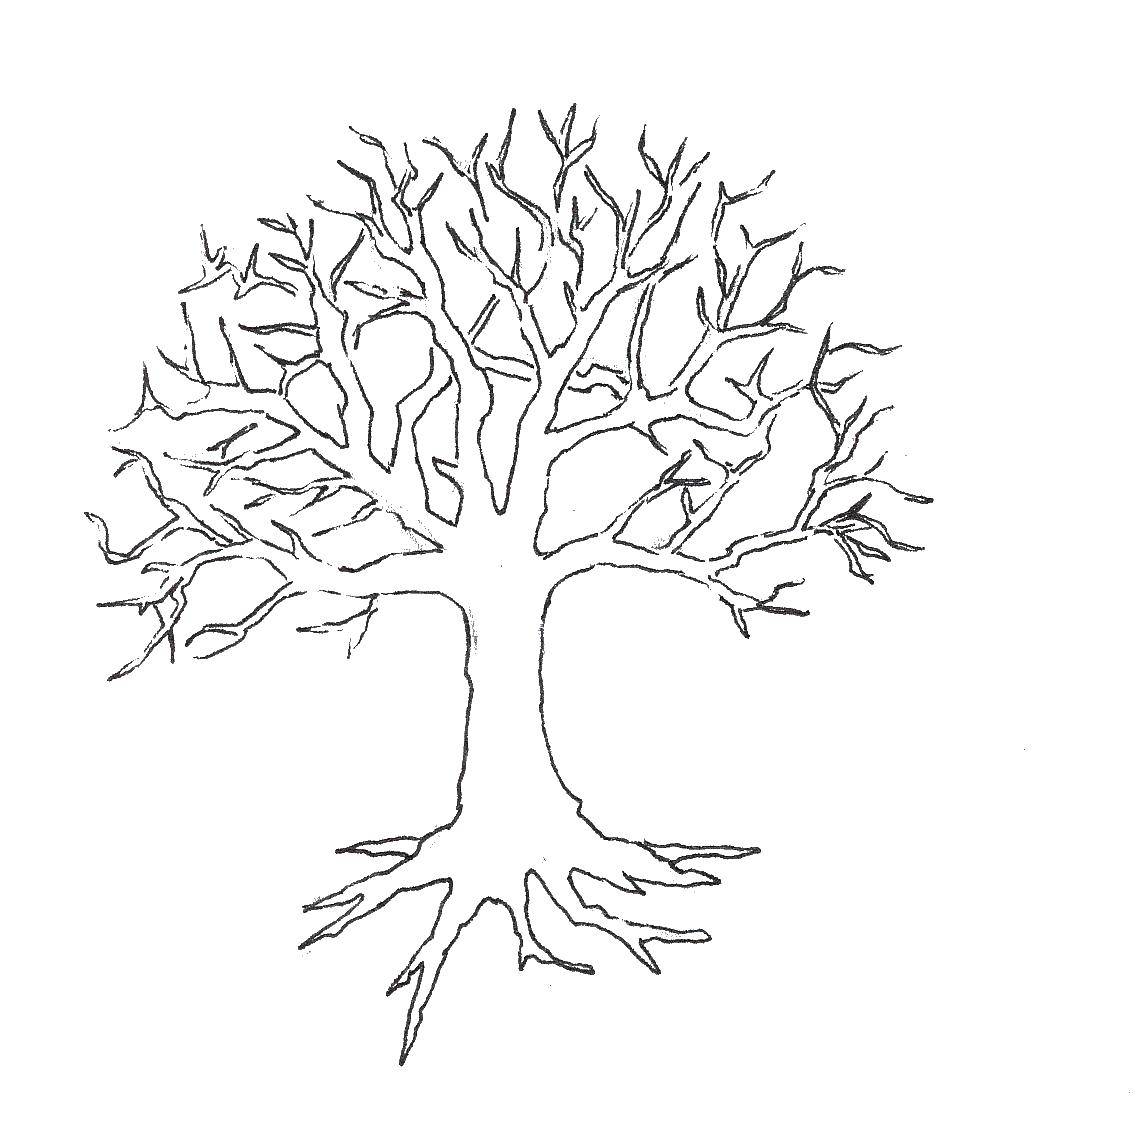 Coloring The tree and roots. Category The contour of the tree. Tags:  wood , contours.